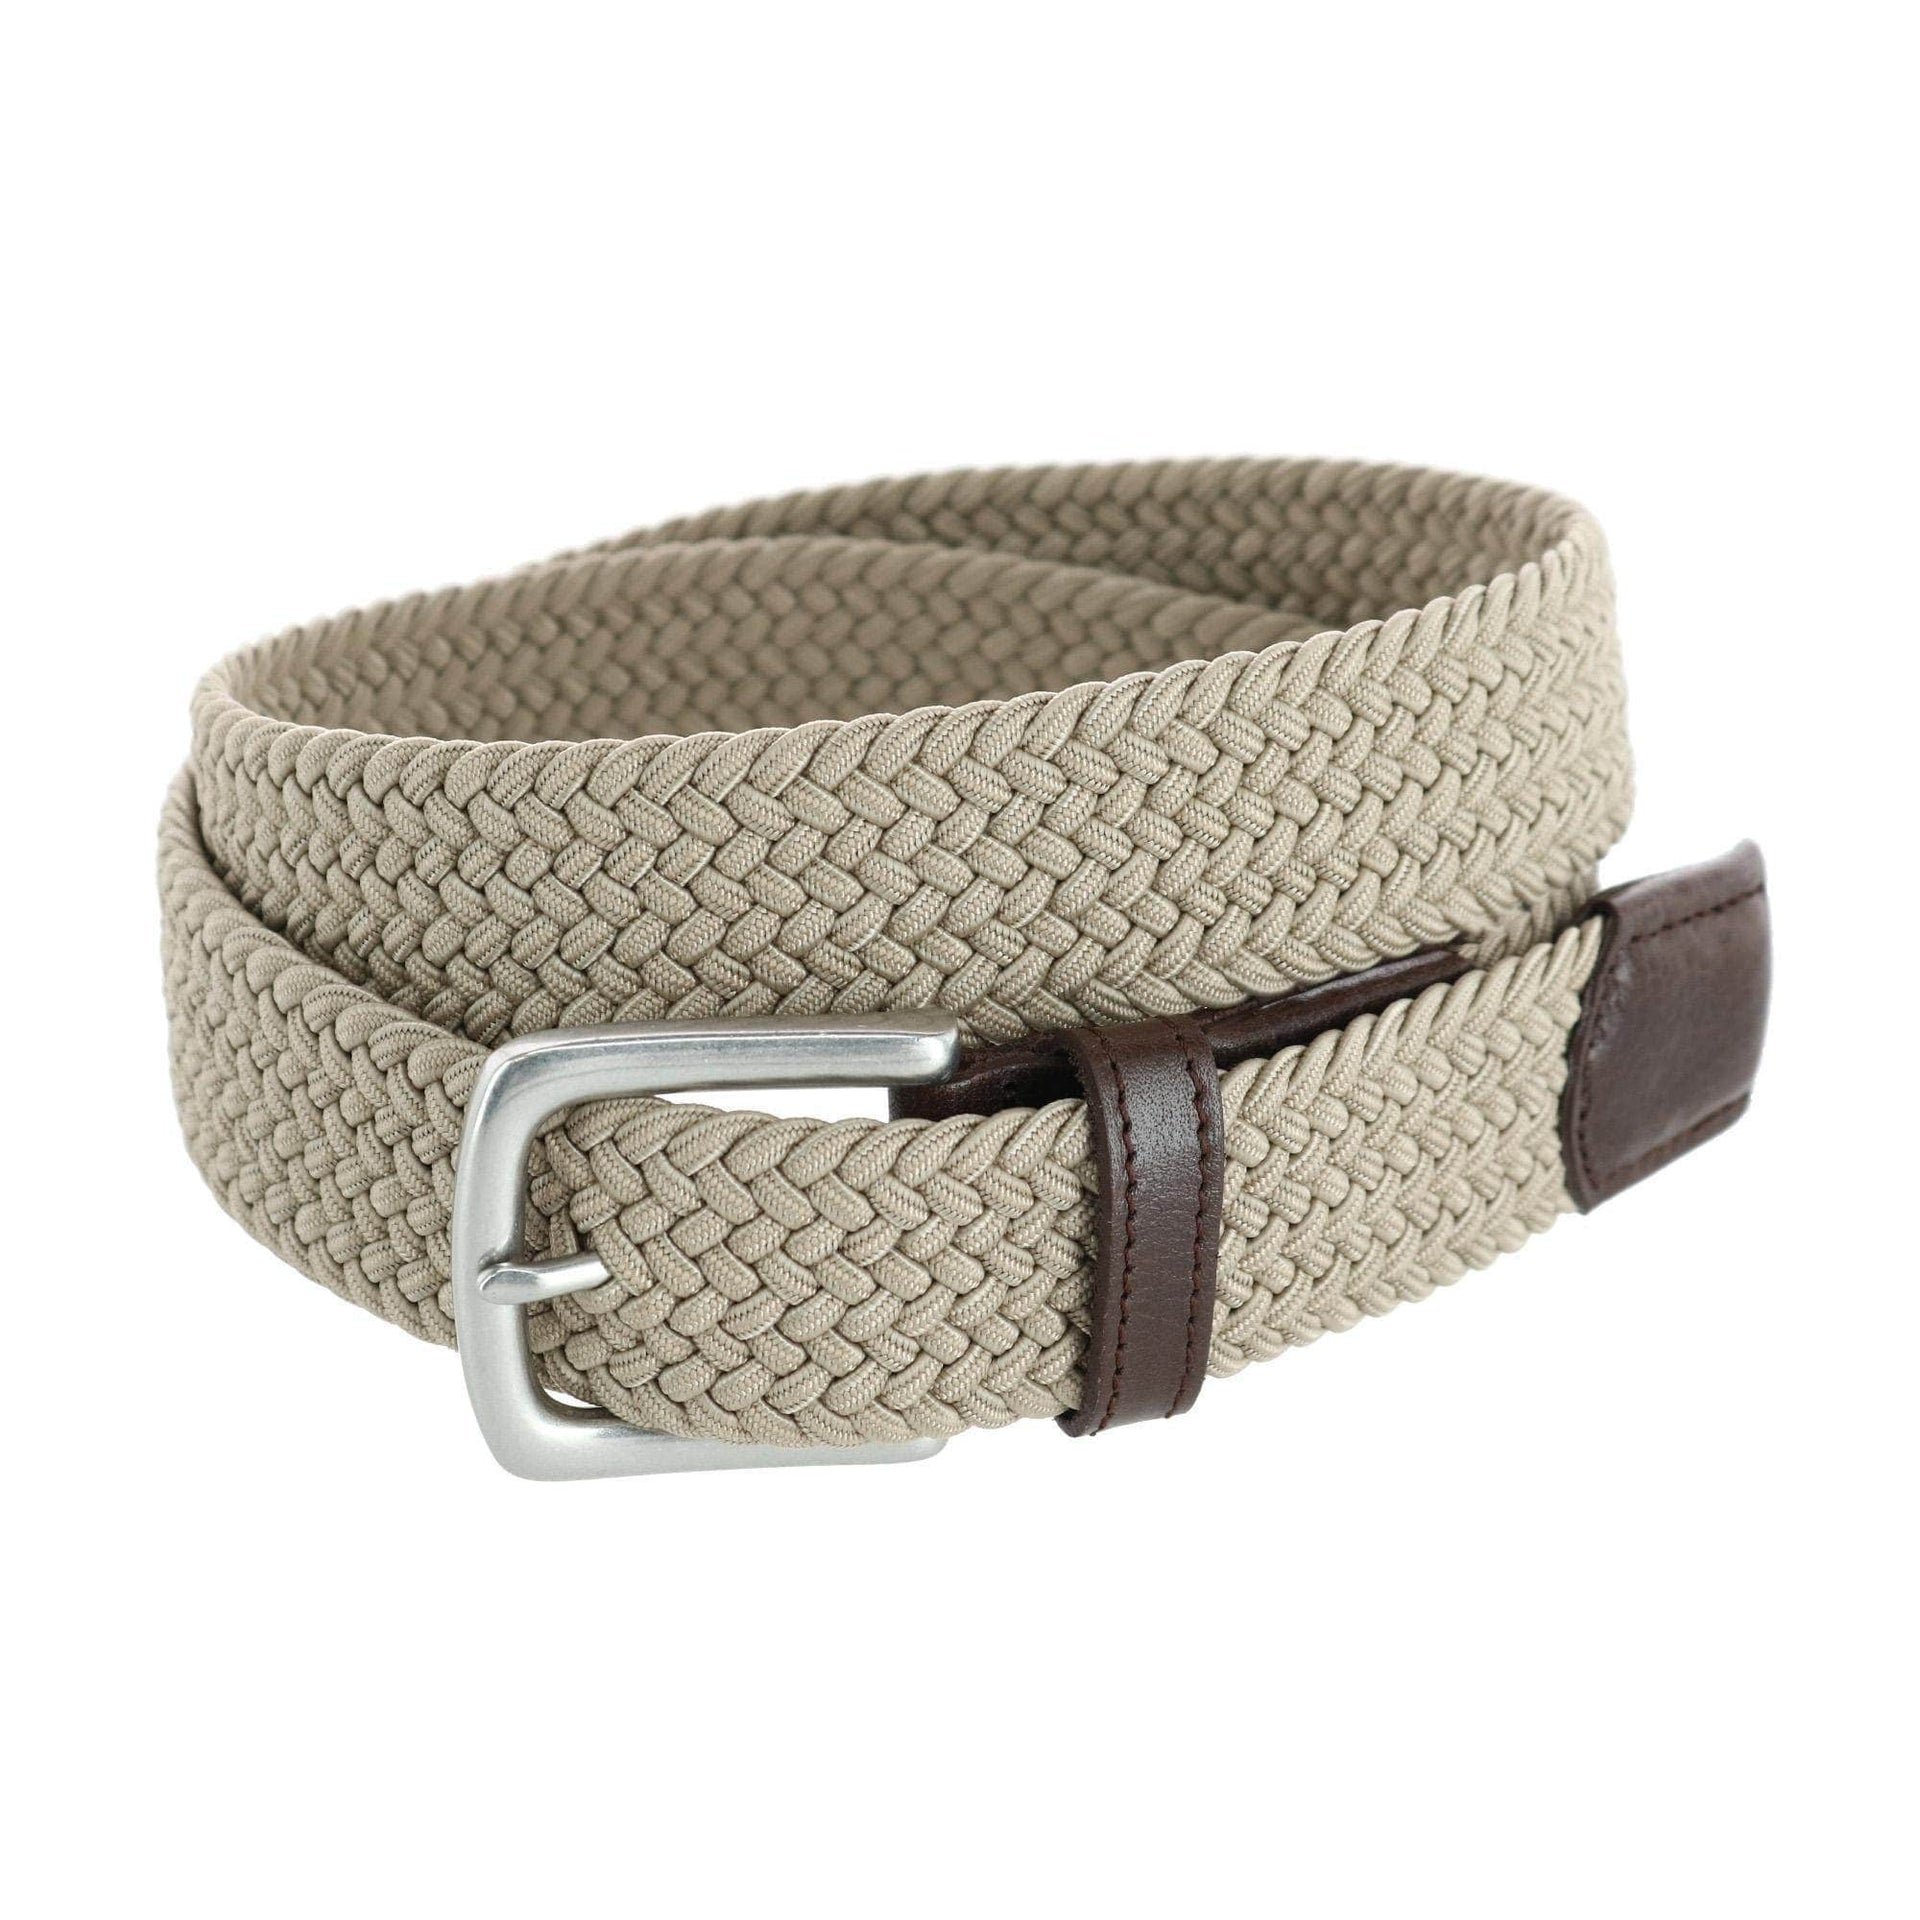 7001 Men's Leather Covered Buckle Woven Elastic Stretch Belt 1-1/4 Wide